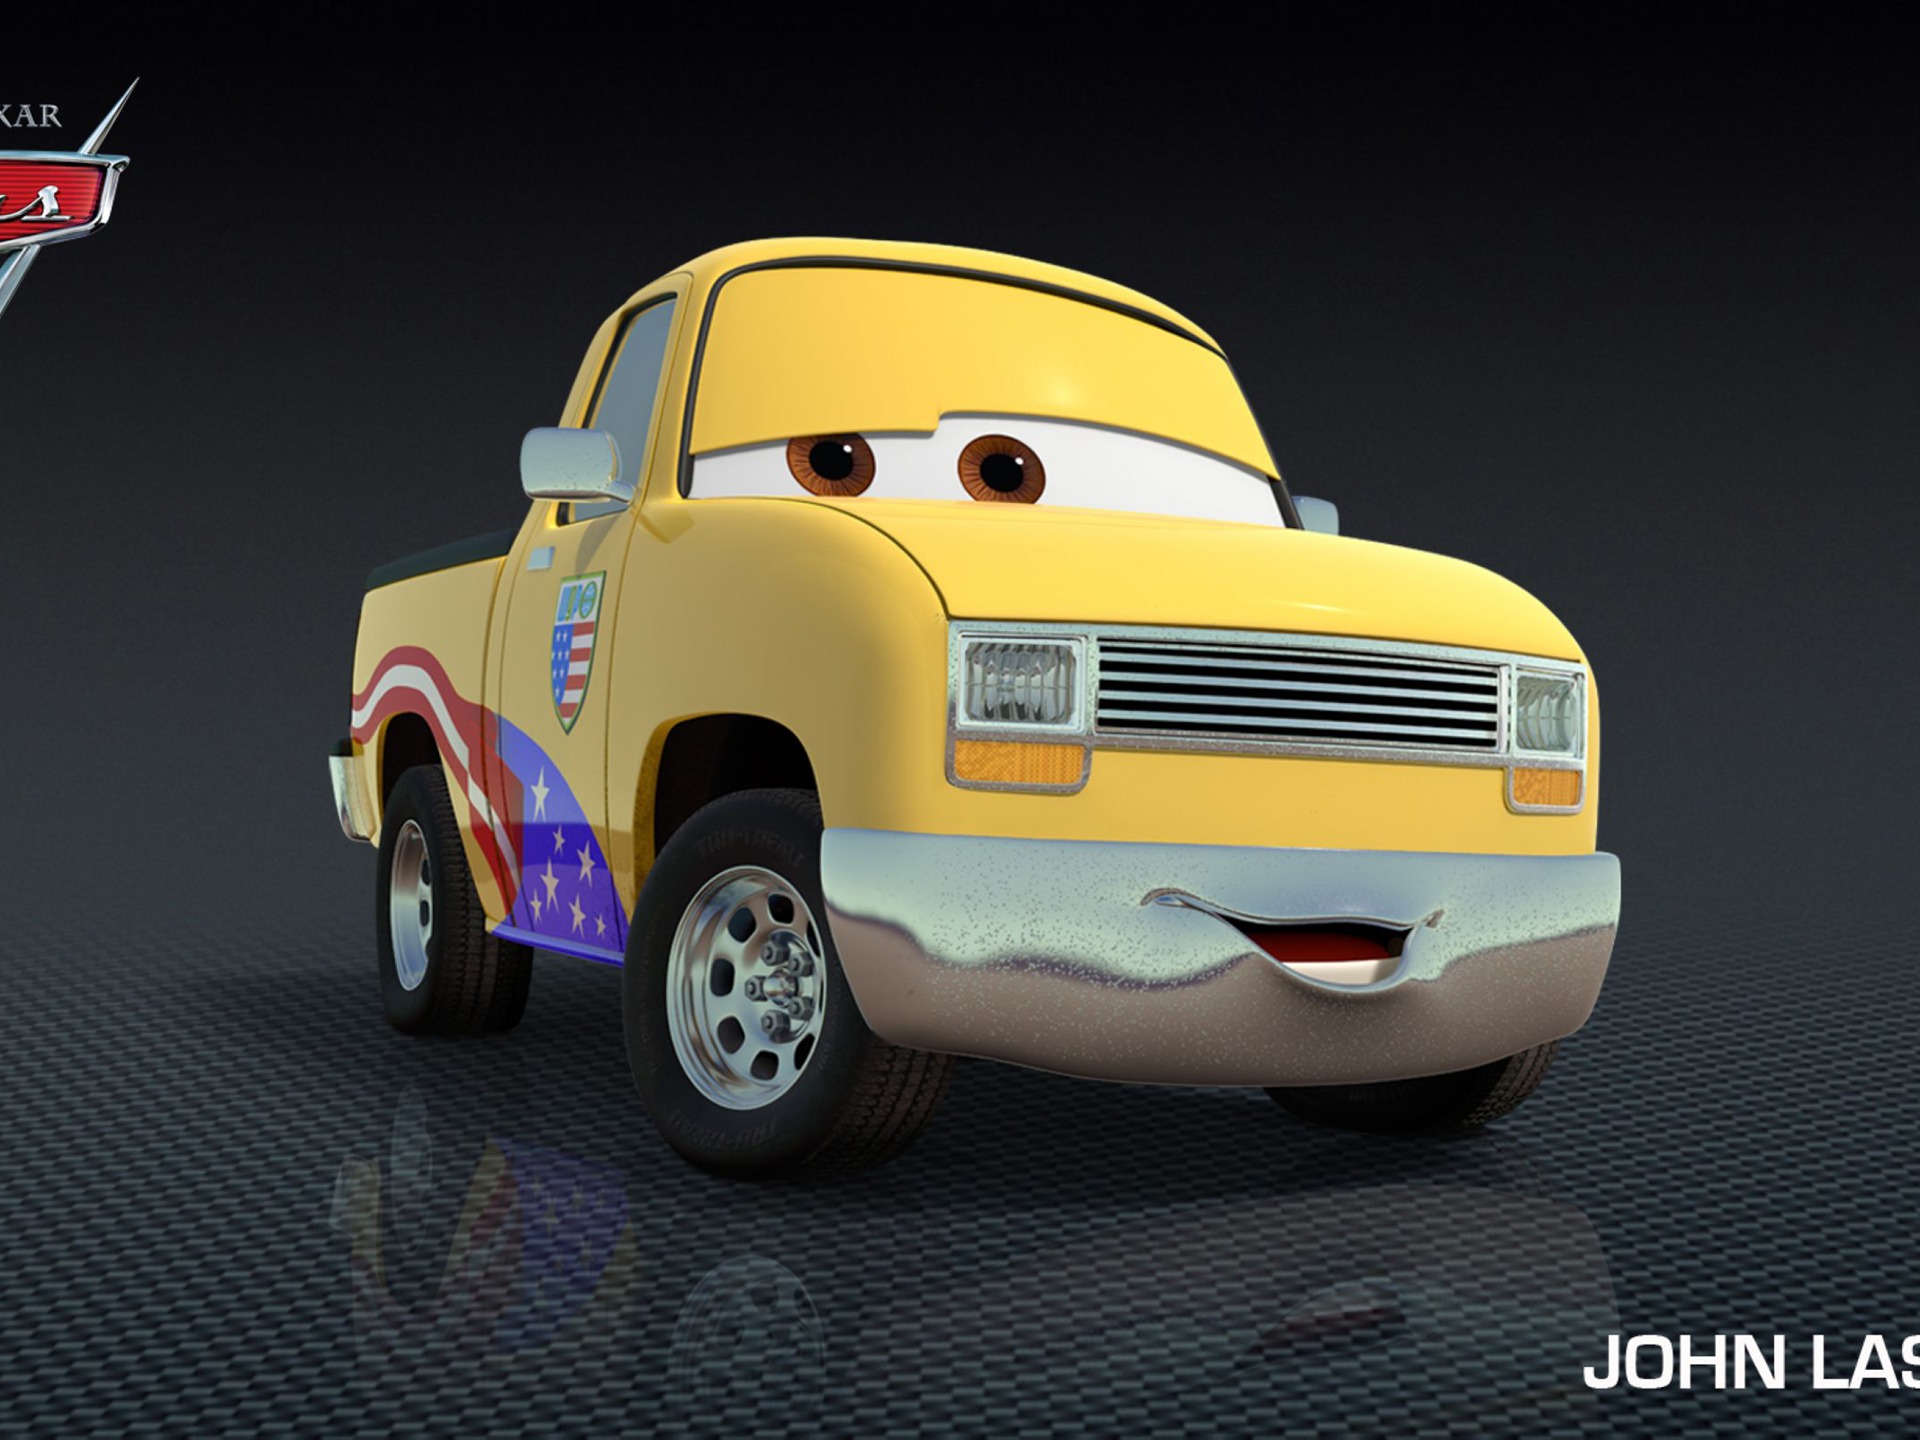 Cars 2 wallpapers #30 - 1920x1440